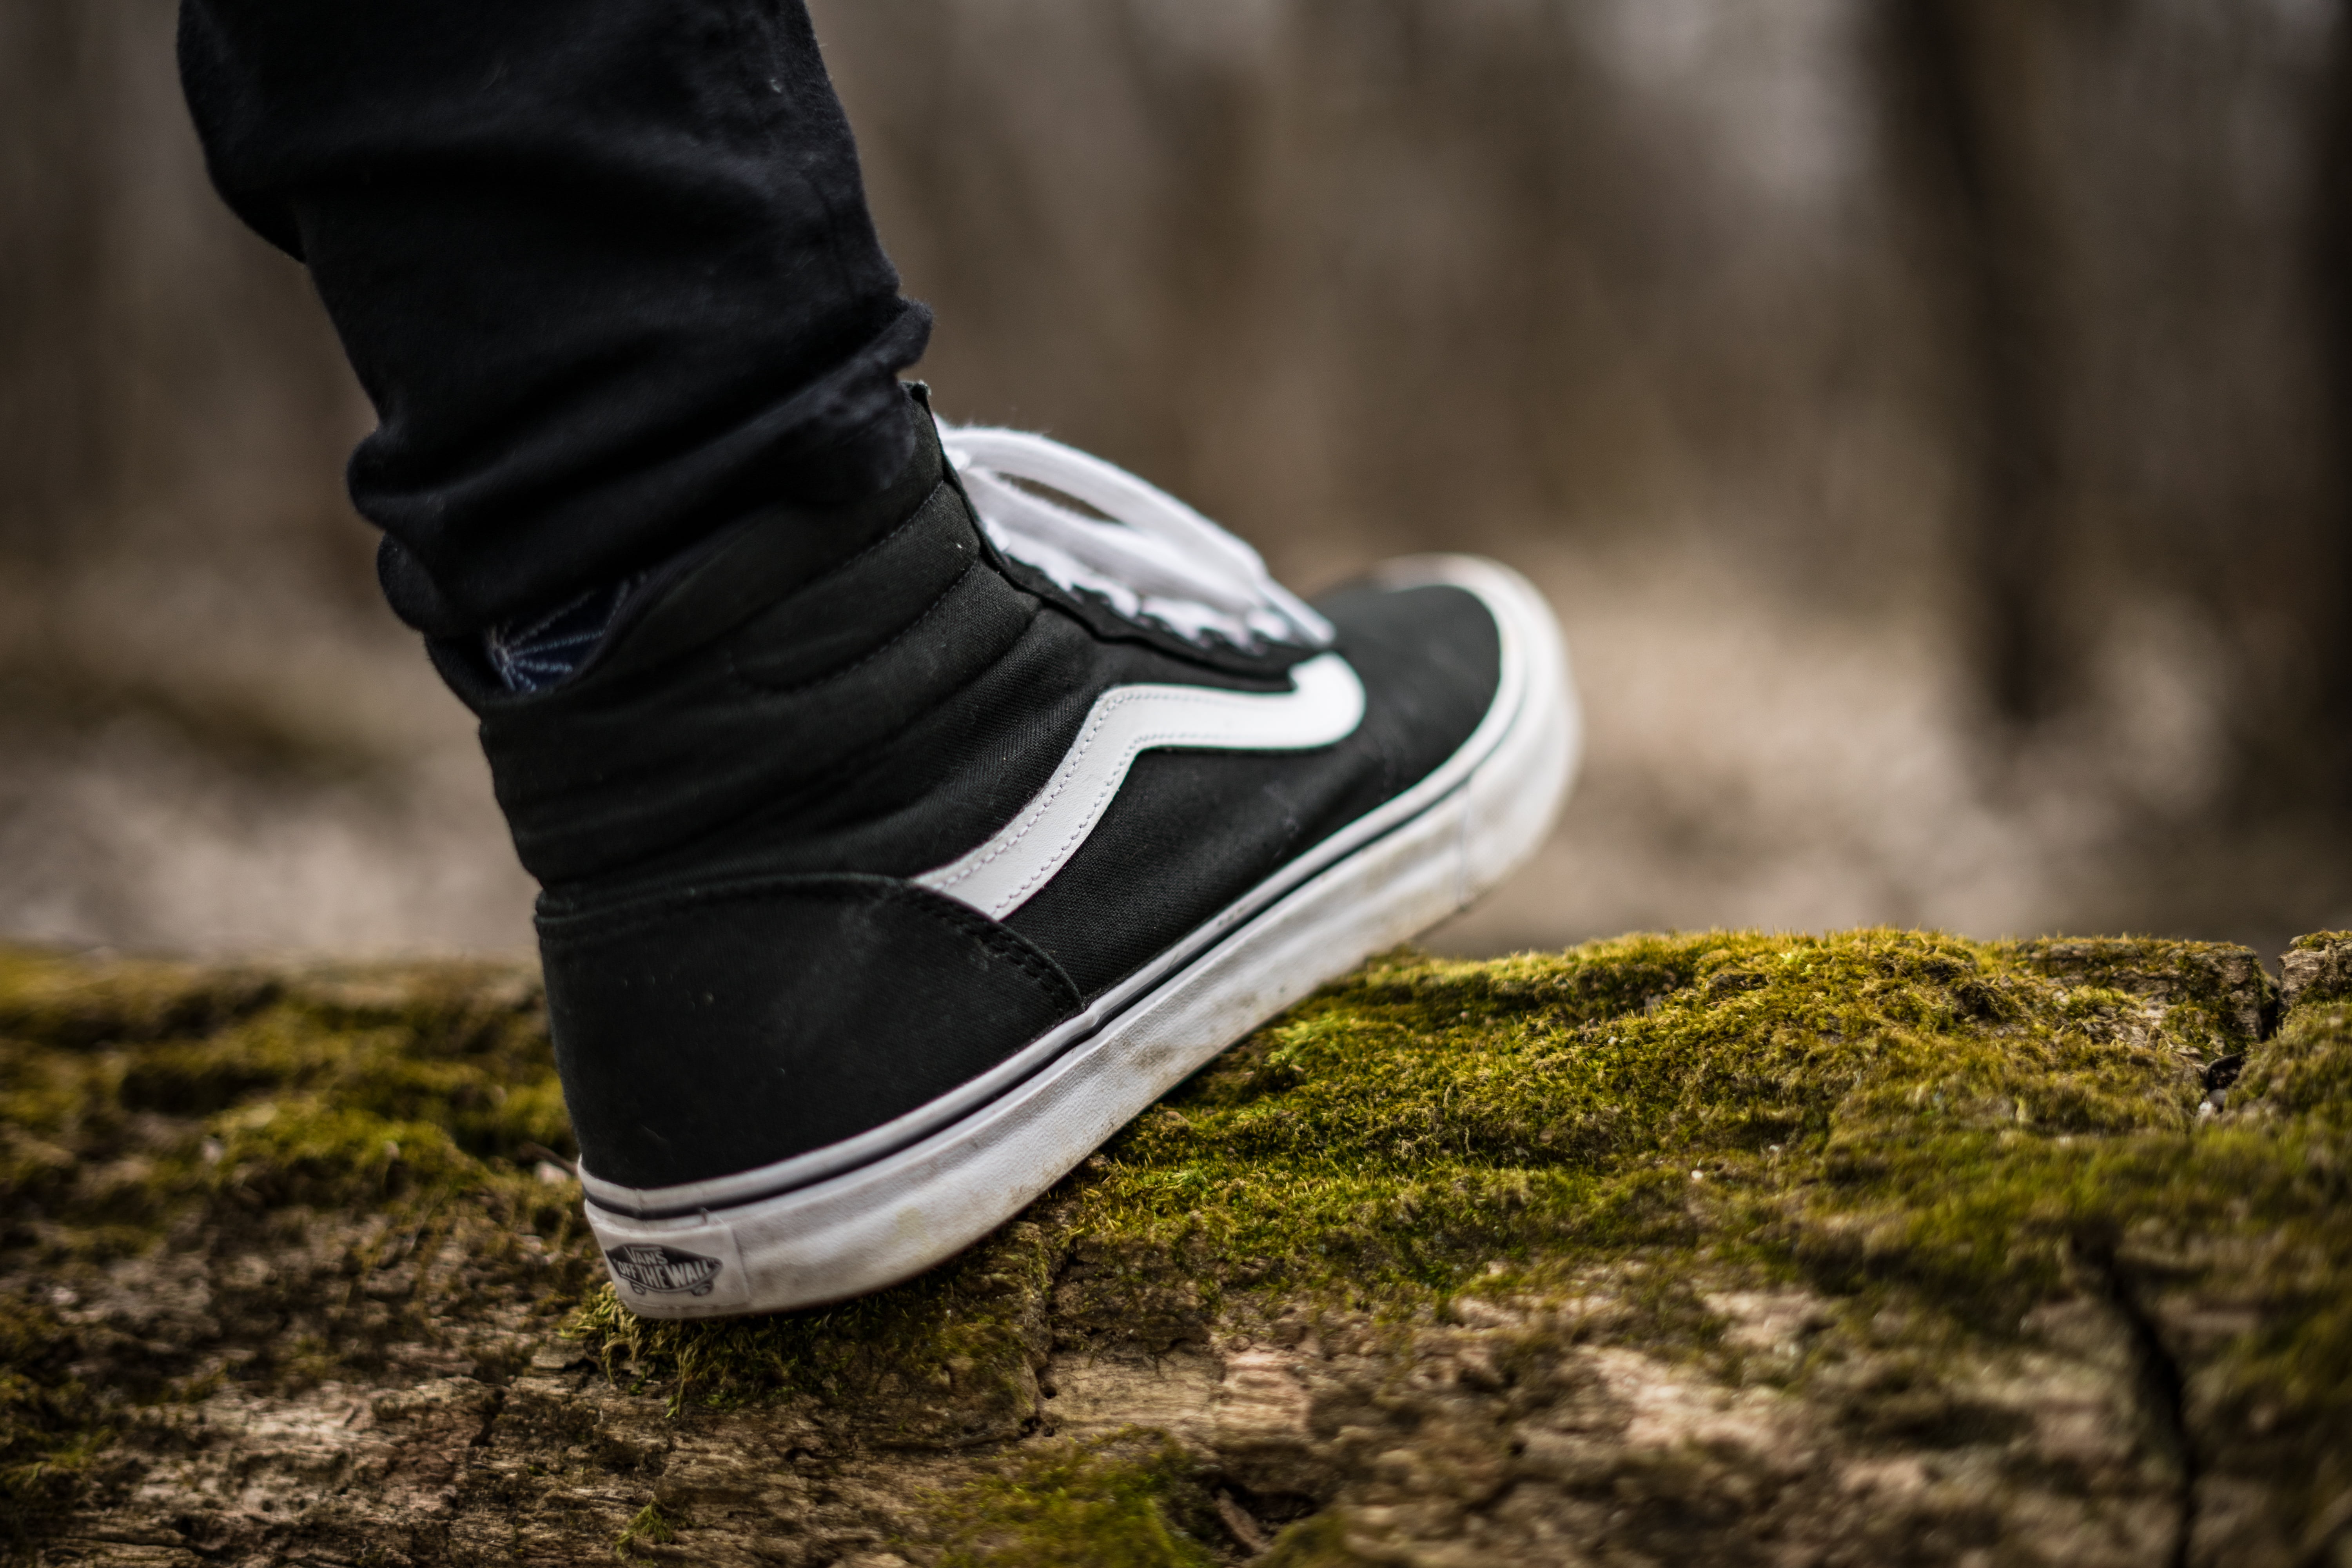 unpaired black and white Vans Sk8-Hi, sneakers, shoes, legs, outdoors